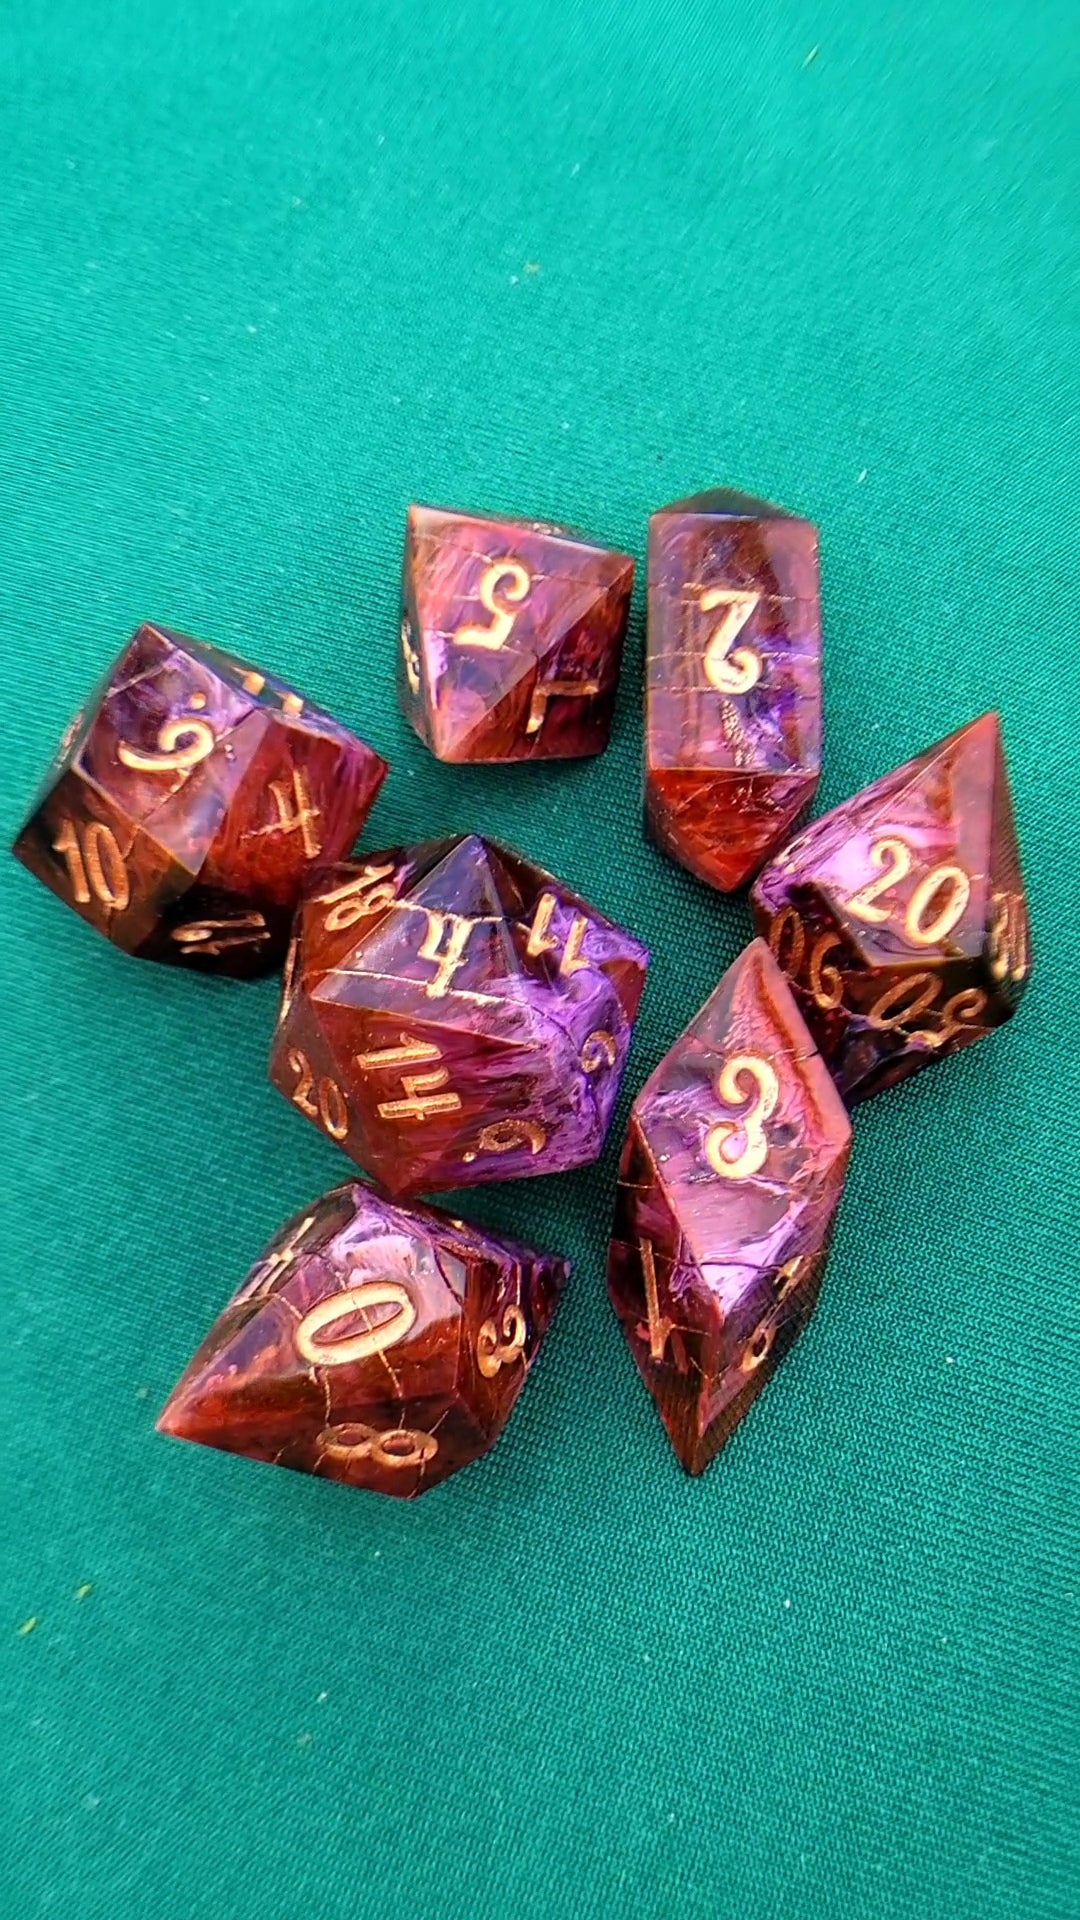 Flowers in Decay ttrpg resin dice set